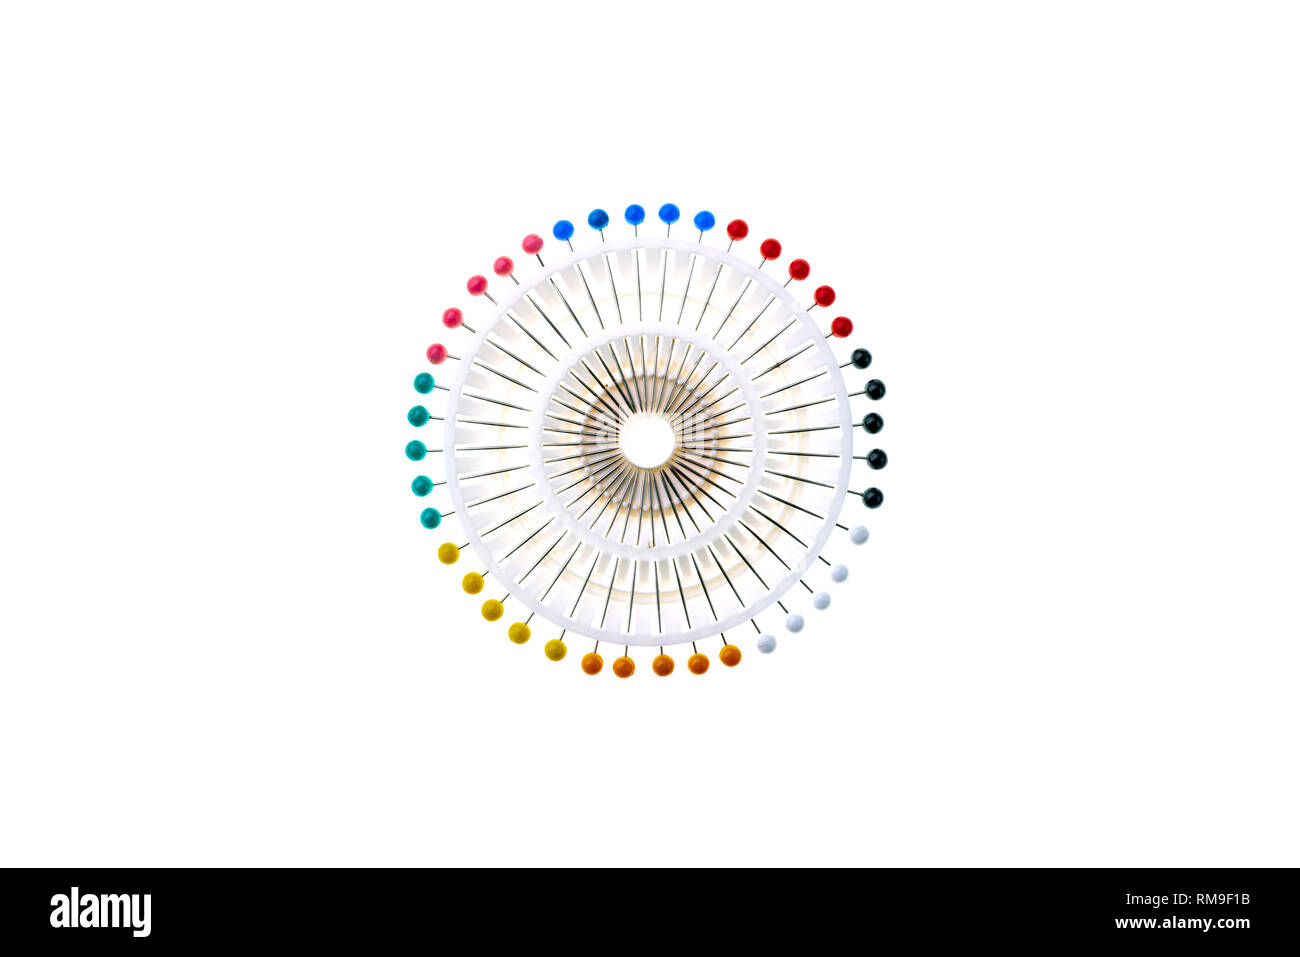 Set of colourful round headed or berry pins,  in a white plastic holder forming an abstract image. Stock Photo